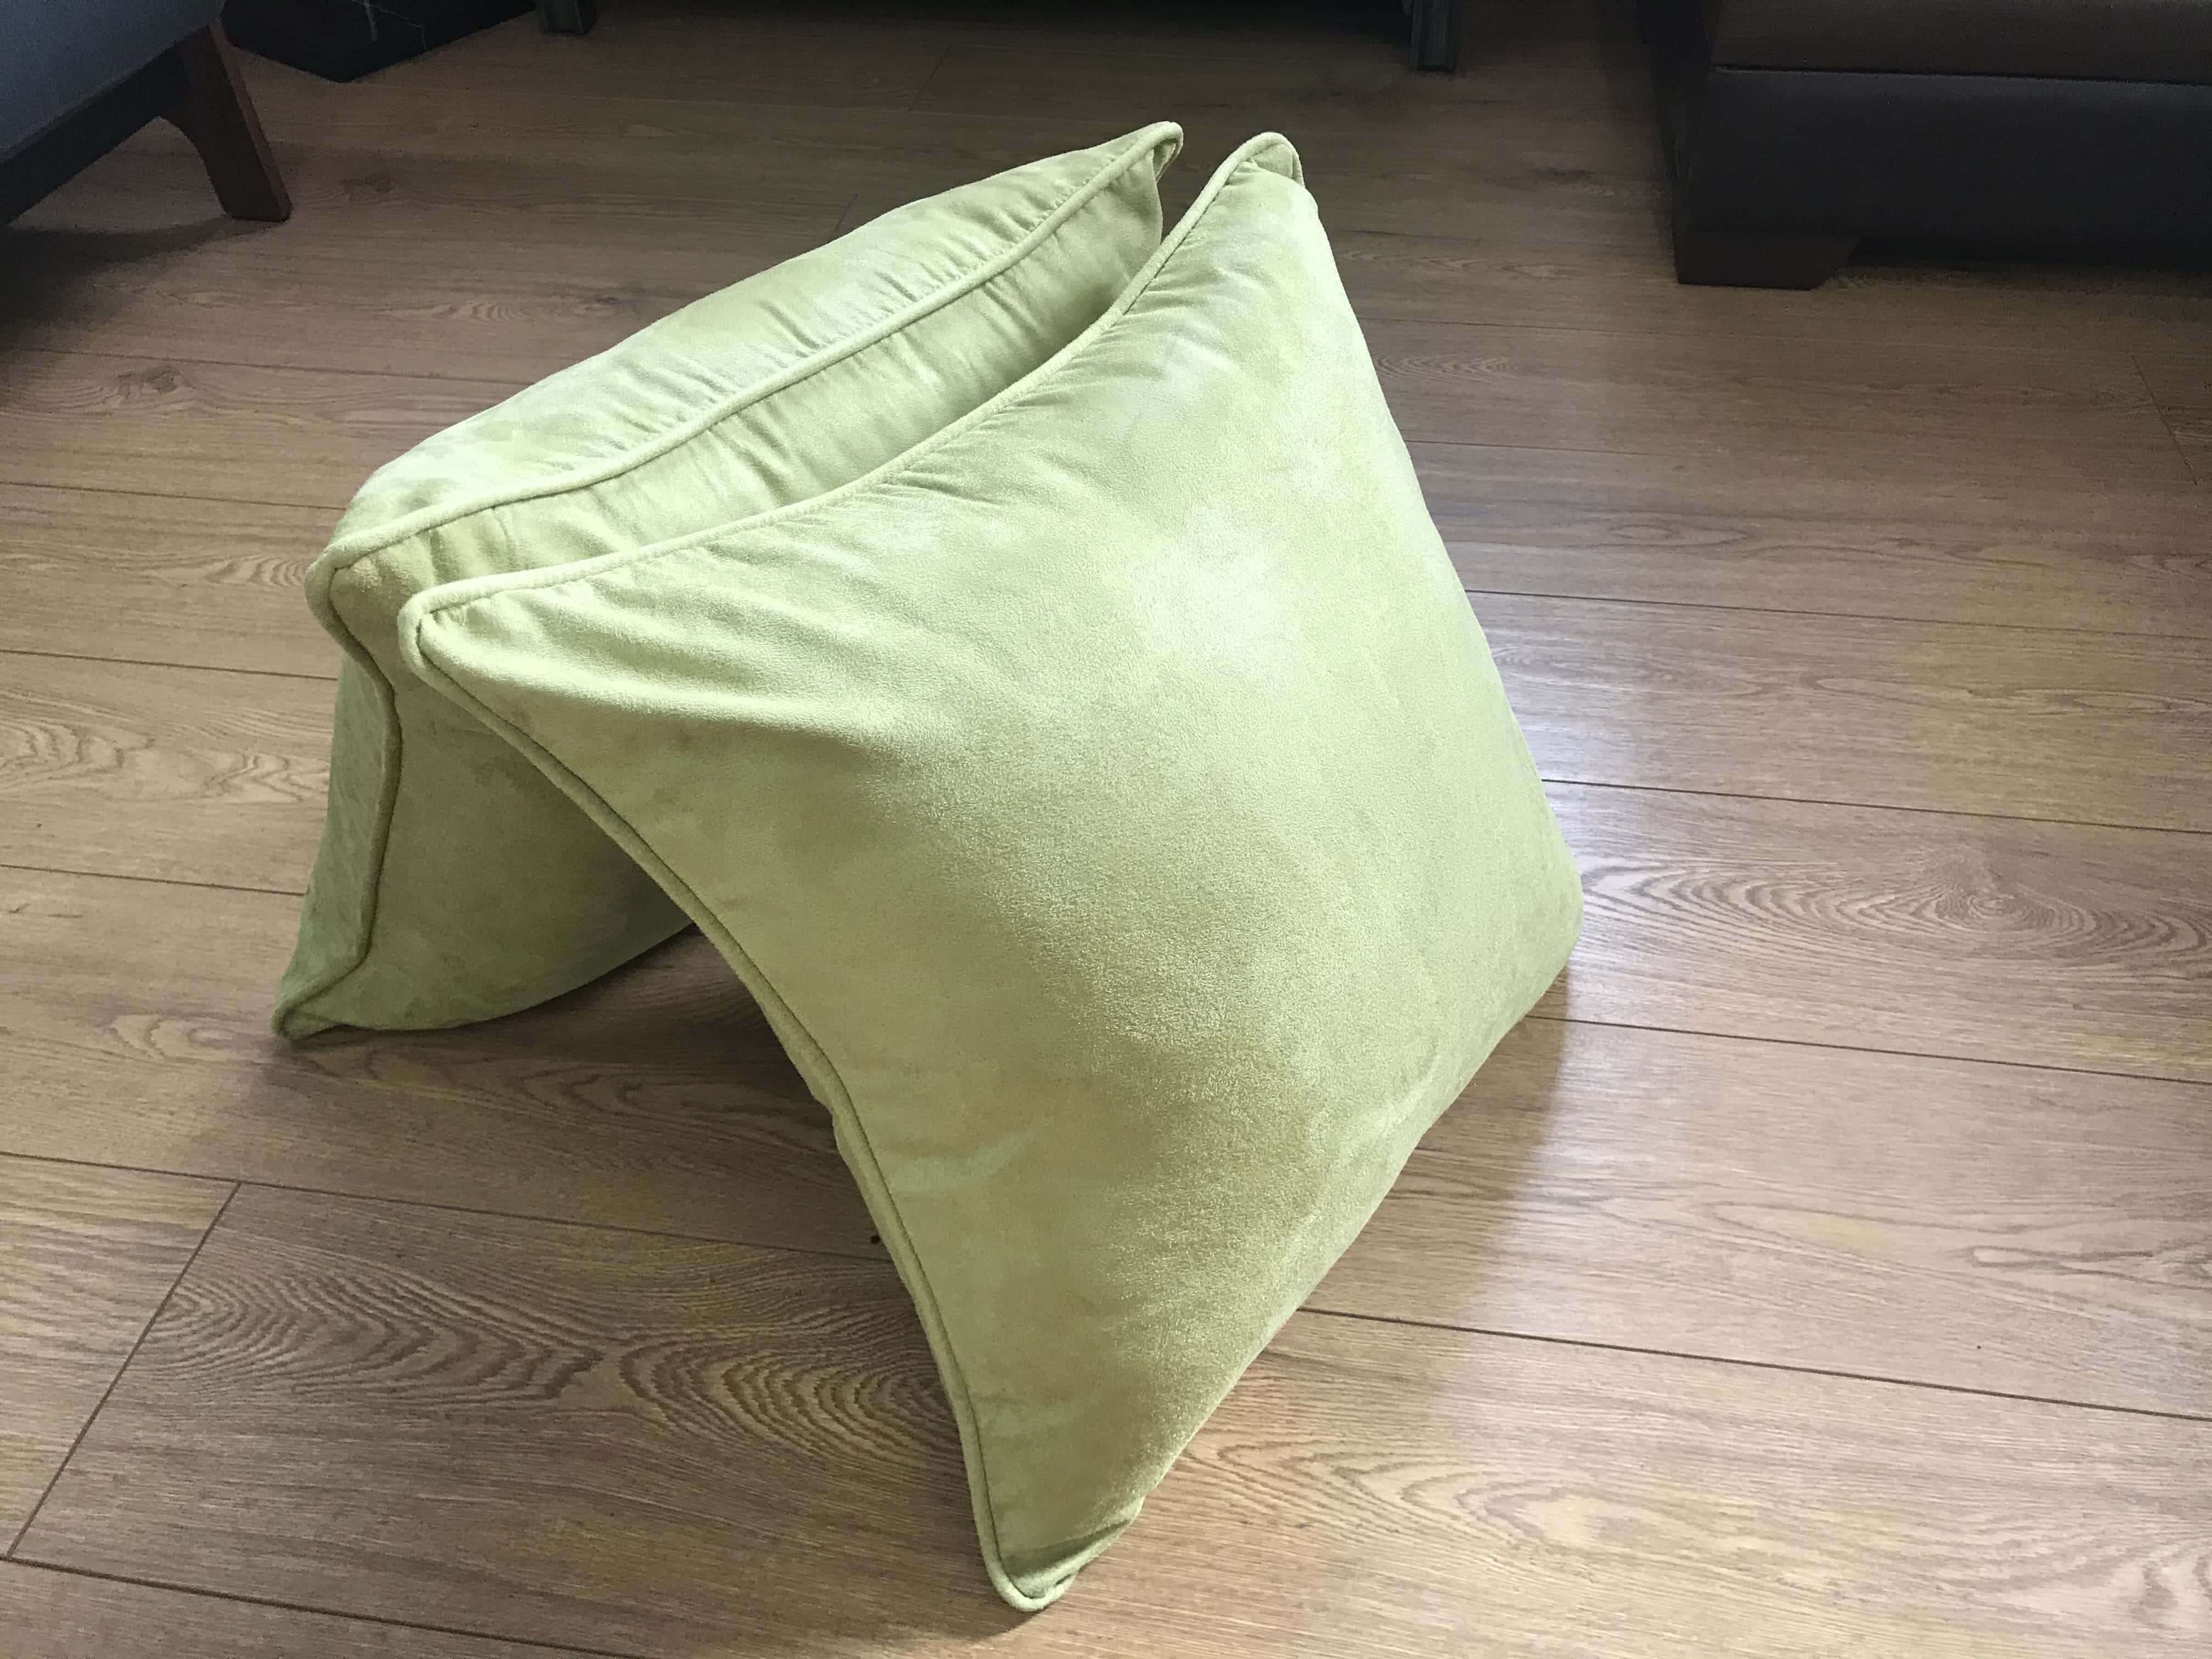 https://futonland.com/common/images/products/large/Green-Throw-Pillows-Piping.jpg